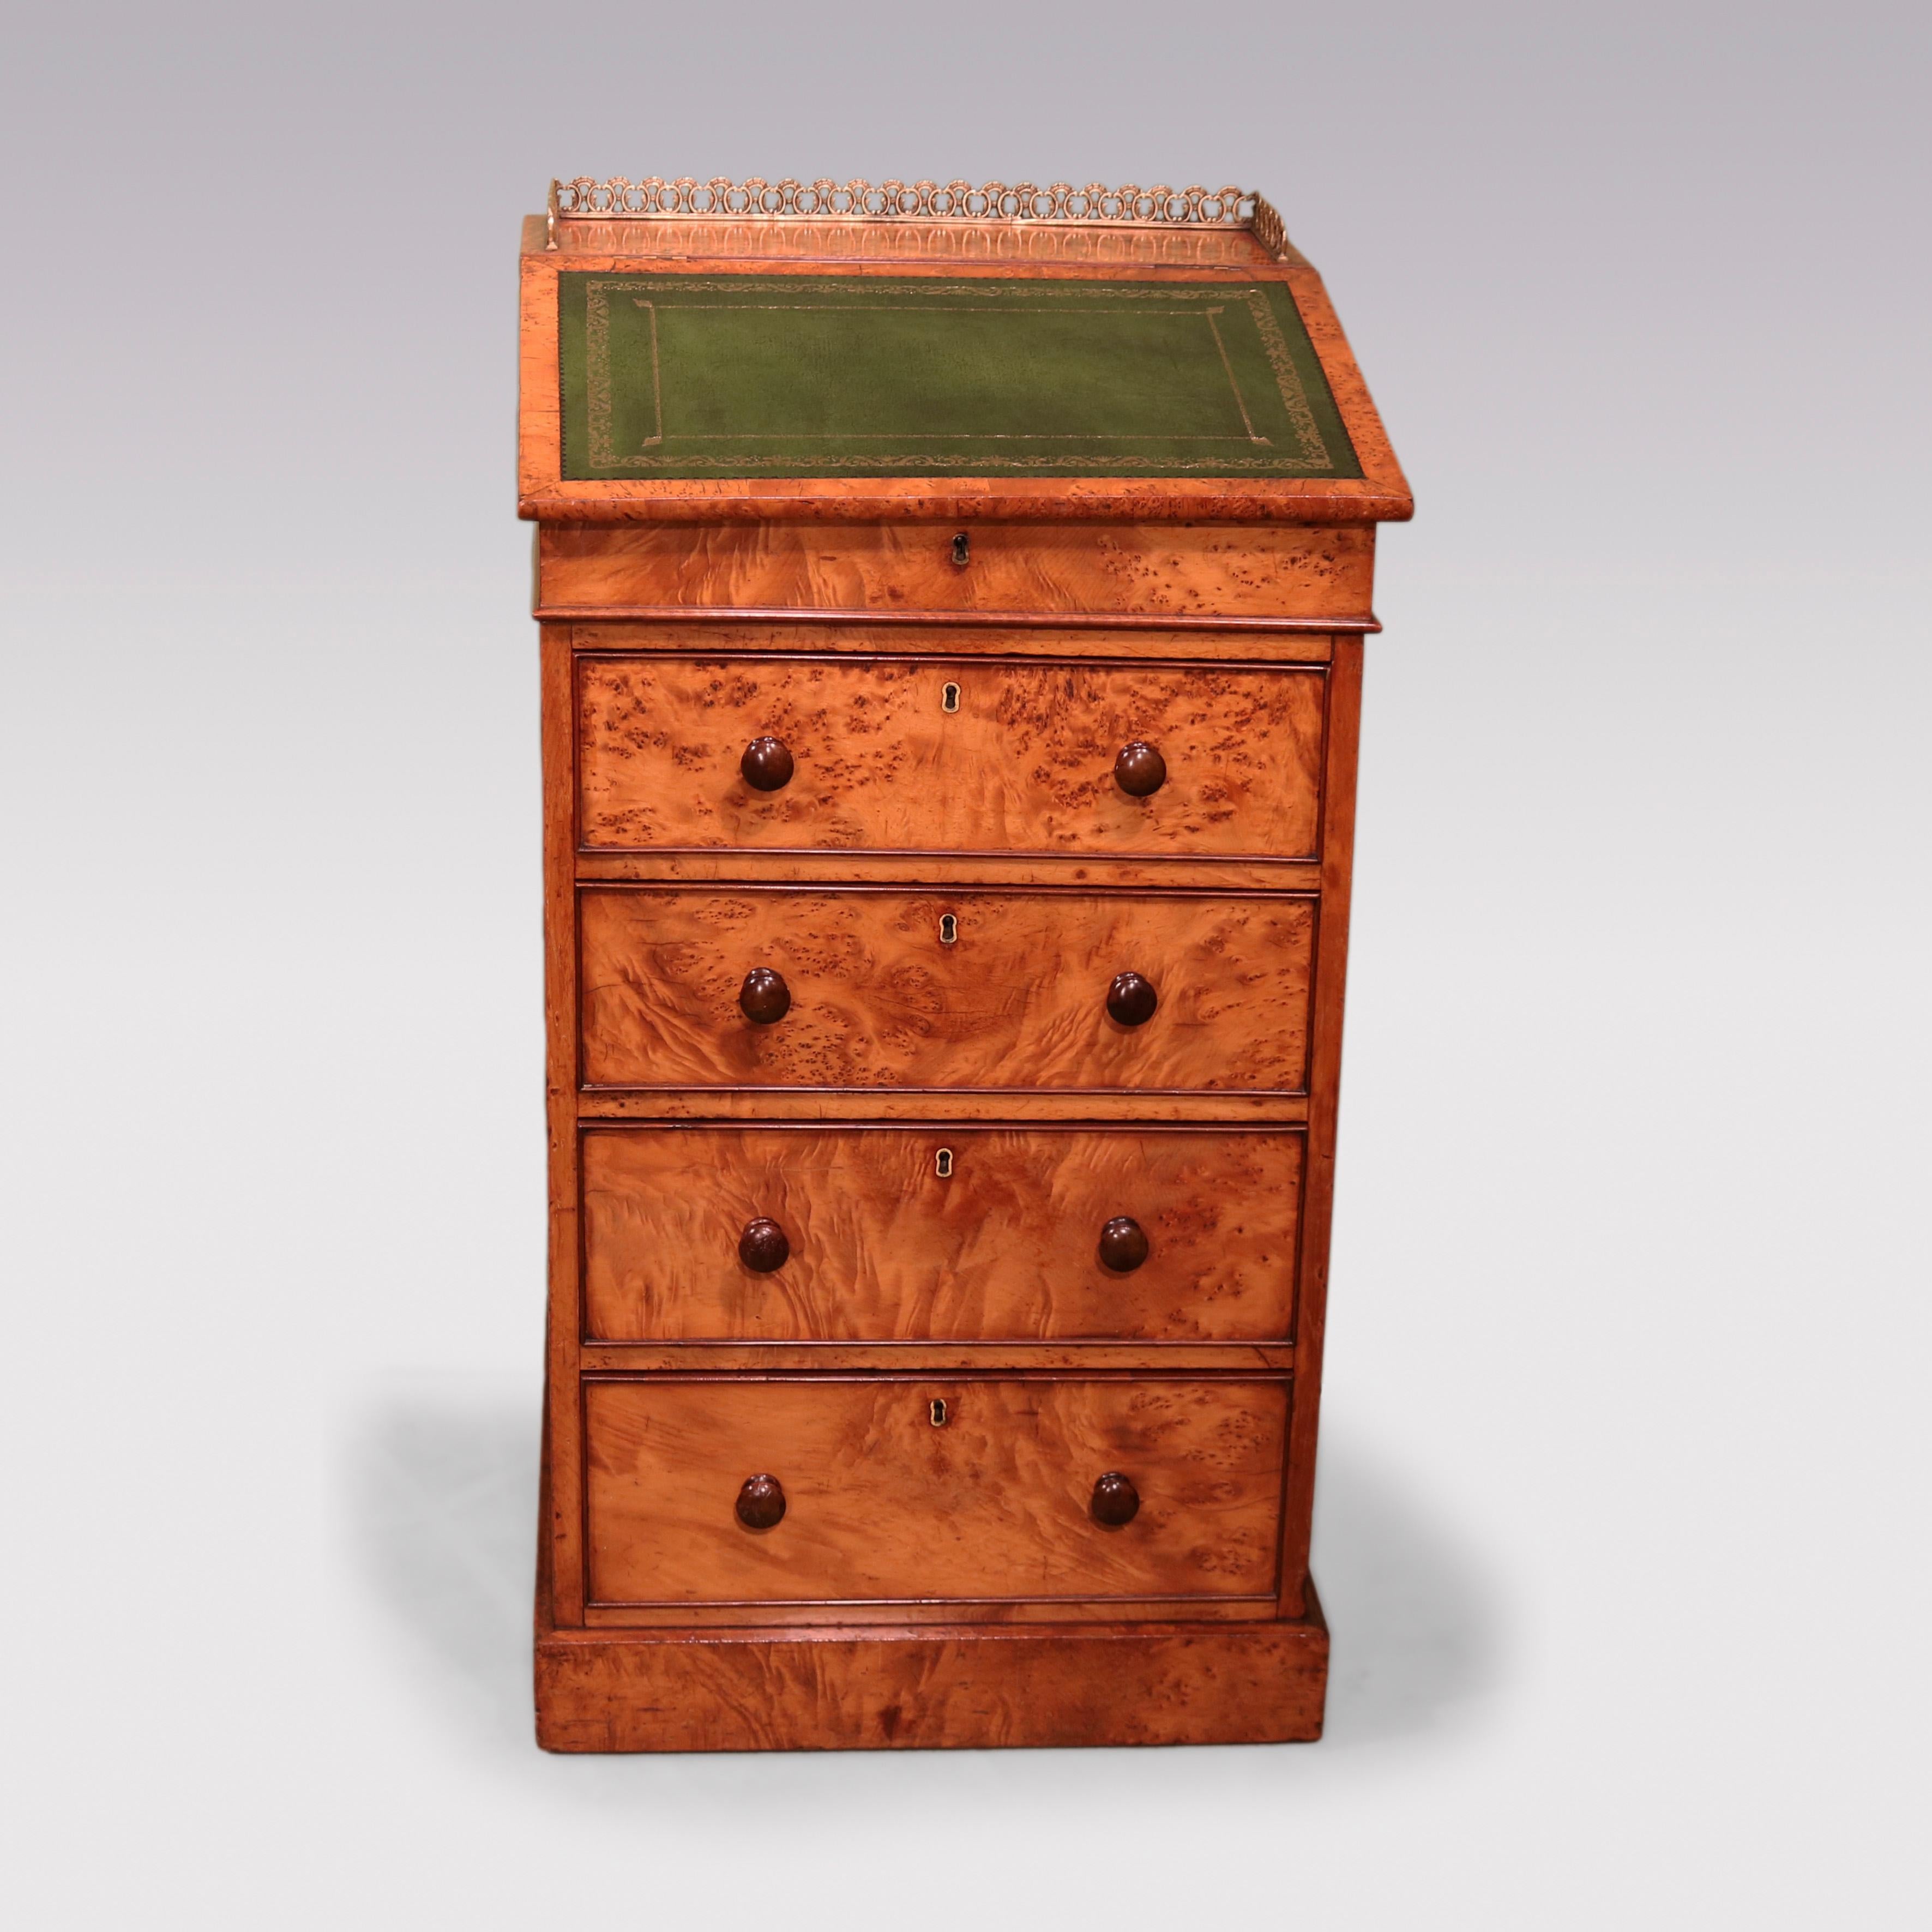 A fine quality mid-19th century burr elm Davenport, having brass gallery & gilt-tooled green leather swivel lift-up top enclosing small drawers, above 4 mahogany & cedar lined graduated drawers ending on plinth base. Stamped C. Hindley and Sons Late